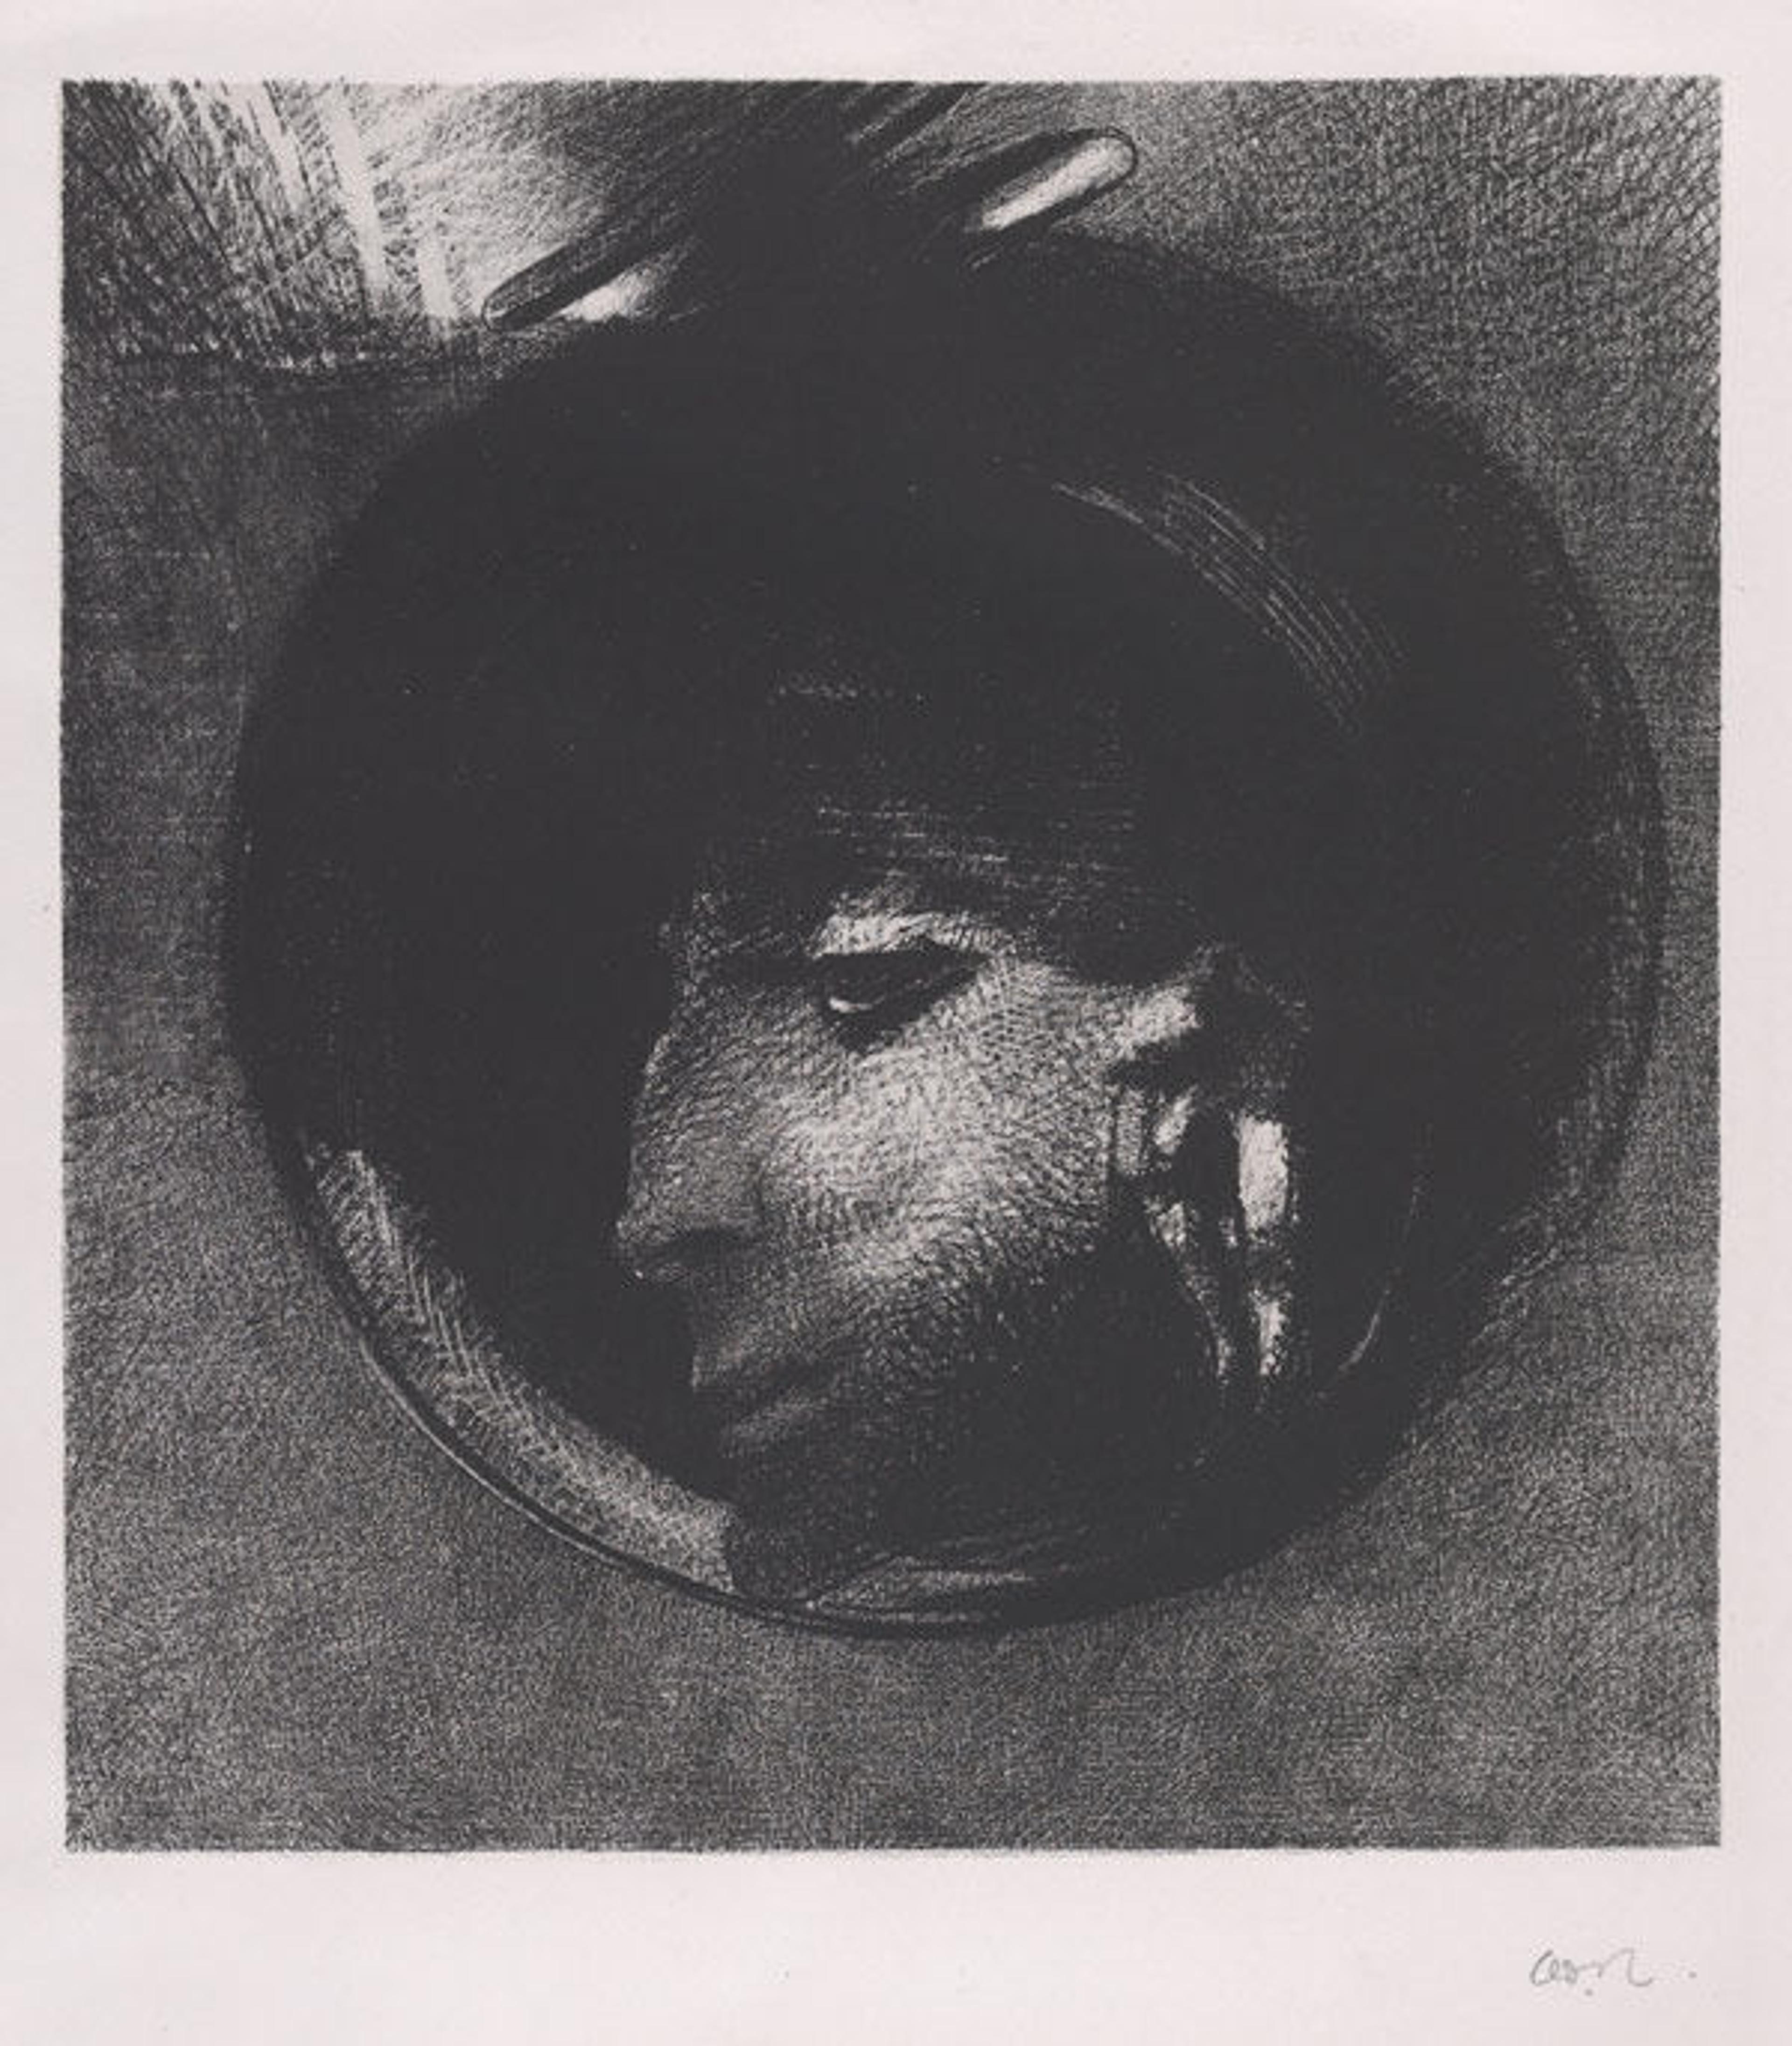 Auricular Cell (from L'Estampe originale, Album II), 1893–94. Odilon Redon (French, 1840–1916). Printer Edward Ancourt (French, 19th century). Publisher André Marty (French, born 1857). Lithograph on chine collée; Sheet: 21 7/16 x 16 1/8 in. (54.4 x 41 cm). Image: 10 9/16 x 9 13/16 in. (26.8 x 25 cm). The Metropolitan Museum of Art, New York, Rogers Fund, 1922 (22.82.1-18)